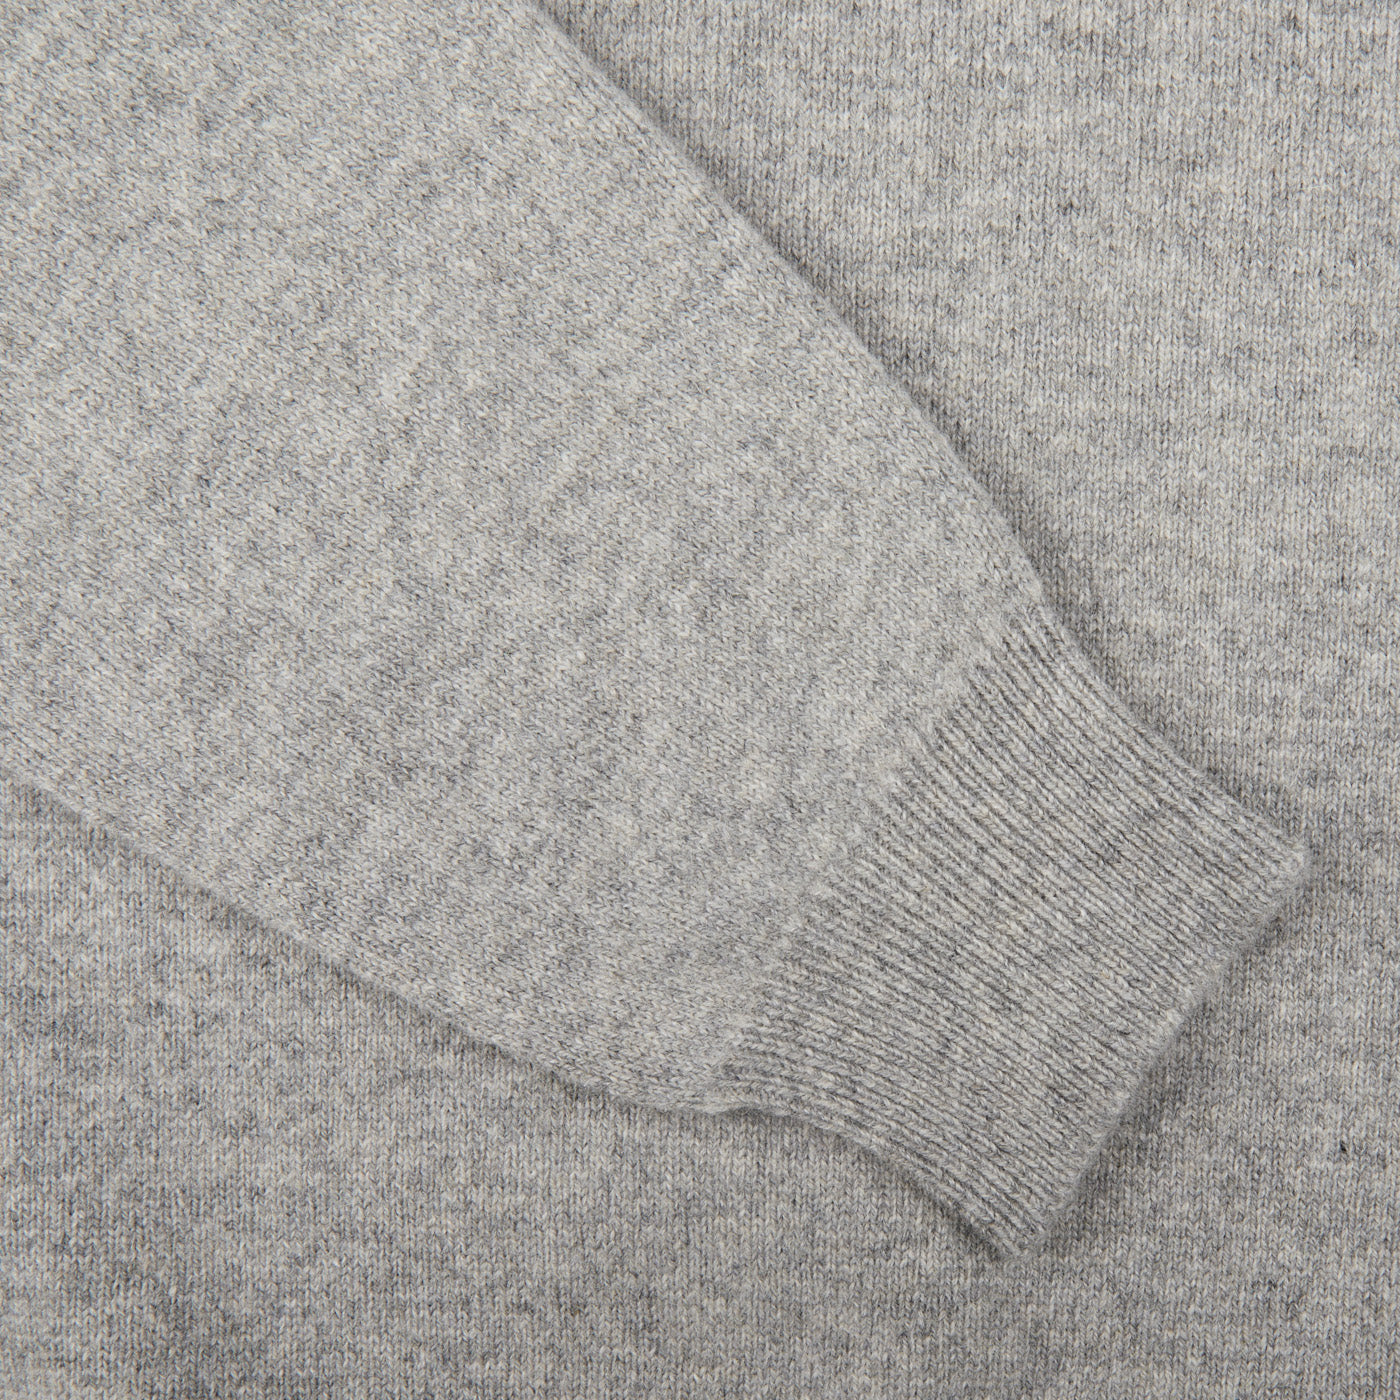 An exquisite Scottish lambswool knitwear, showcasing a William Lockie Flannel Grey V-Neck Lambswool Sweater in close-up.